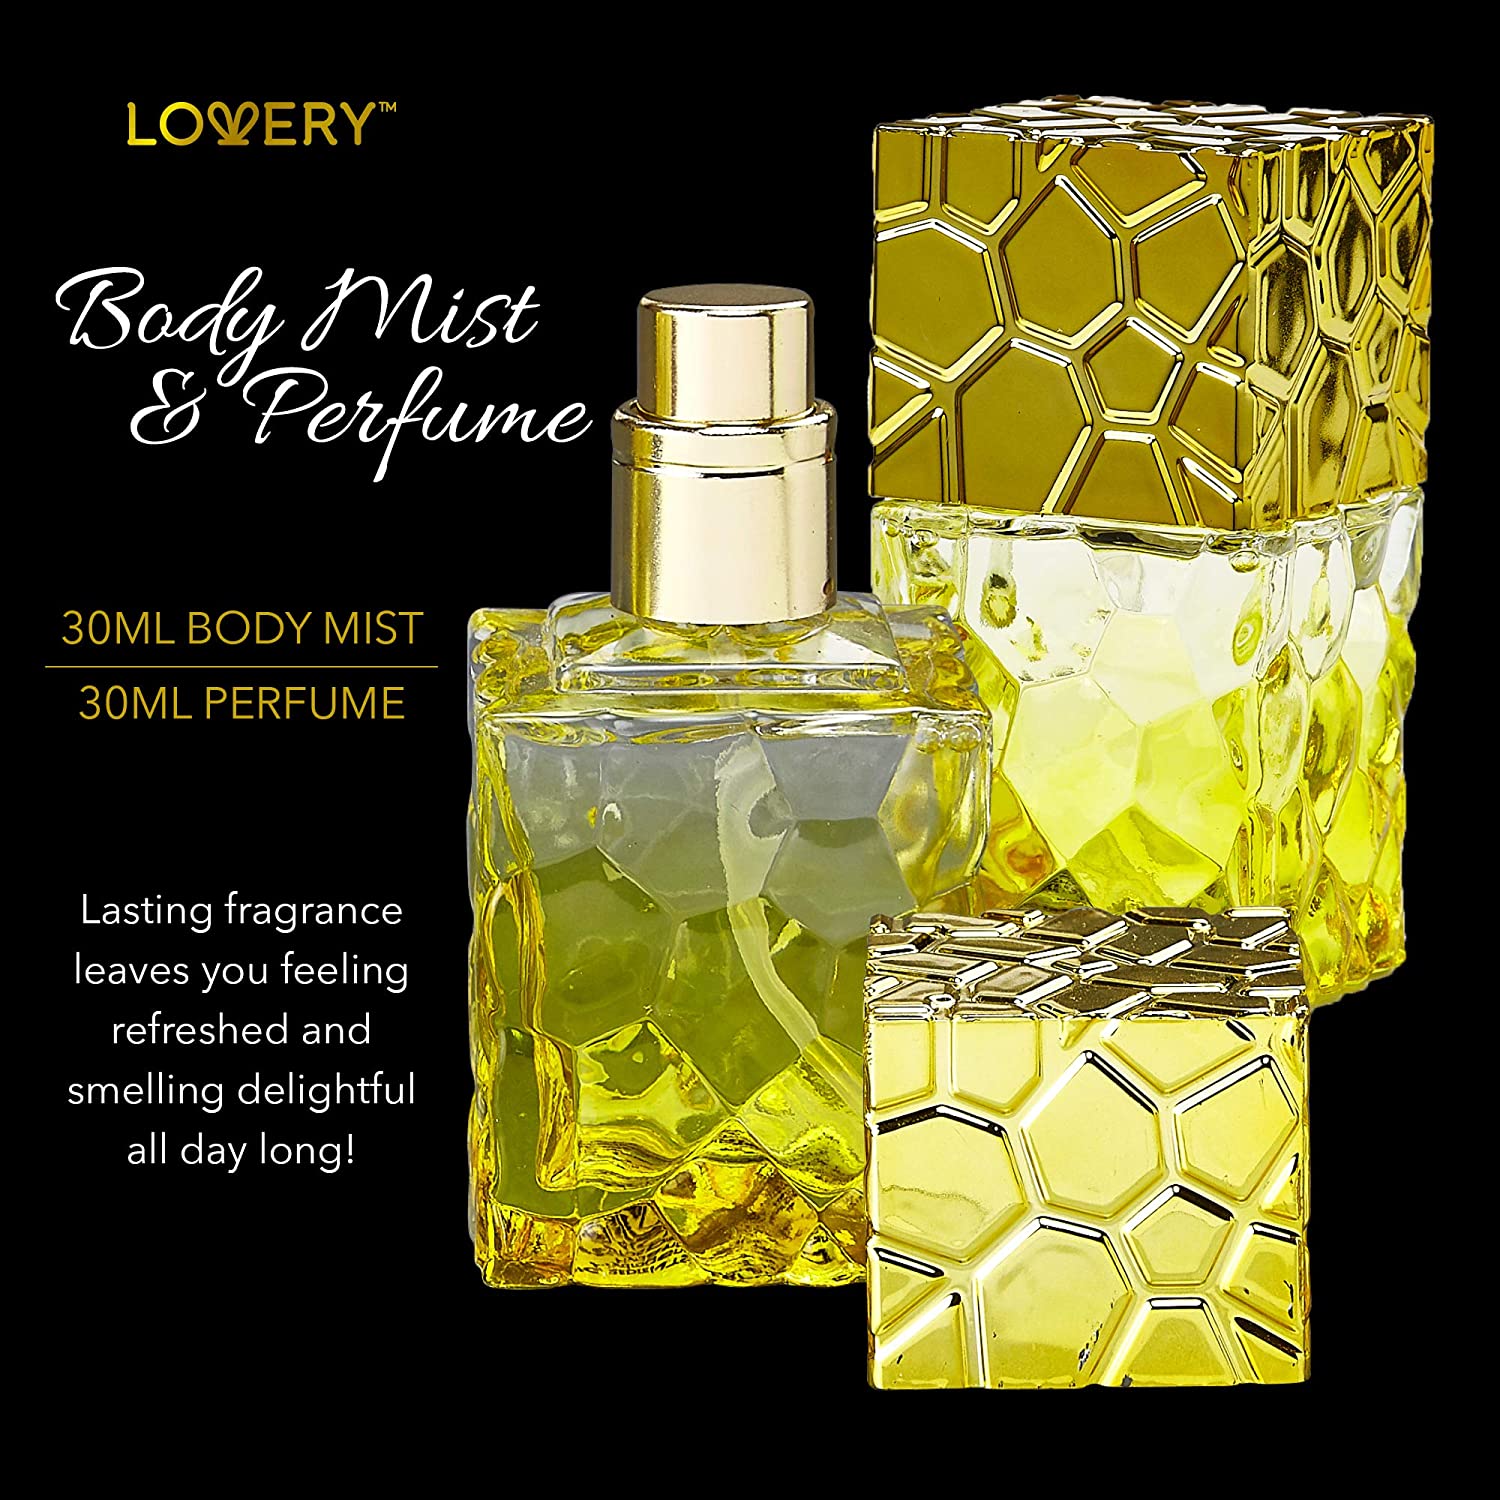 12 Best Perfume and Cologne Gift Sets - Fragrance Gift Sets